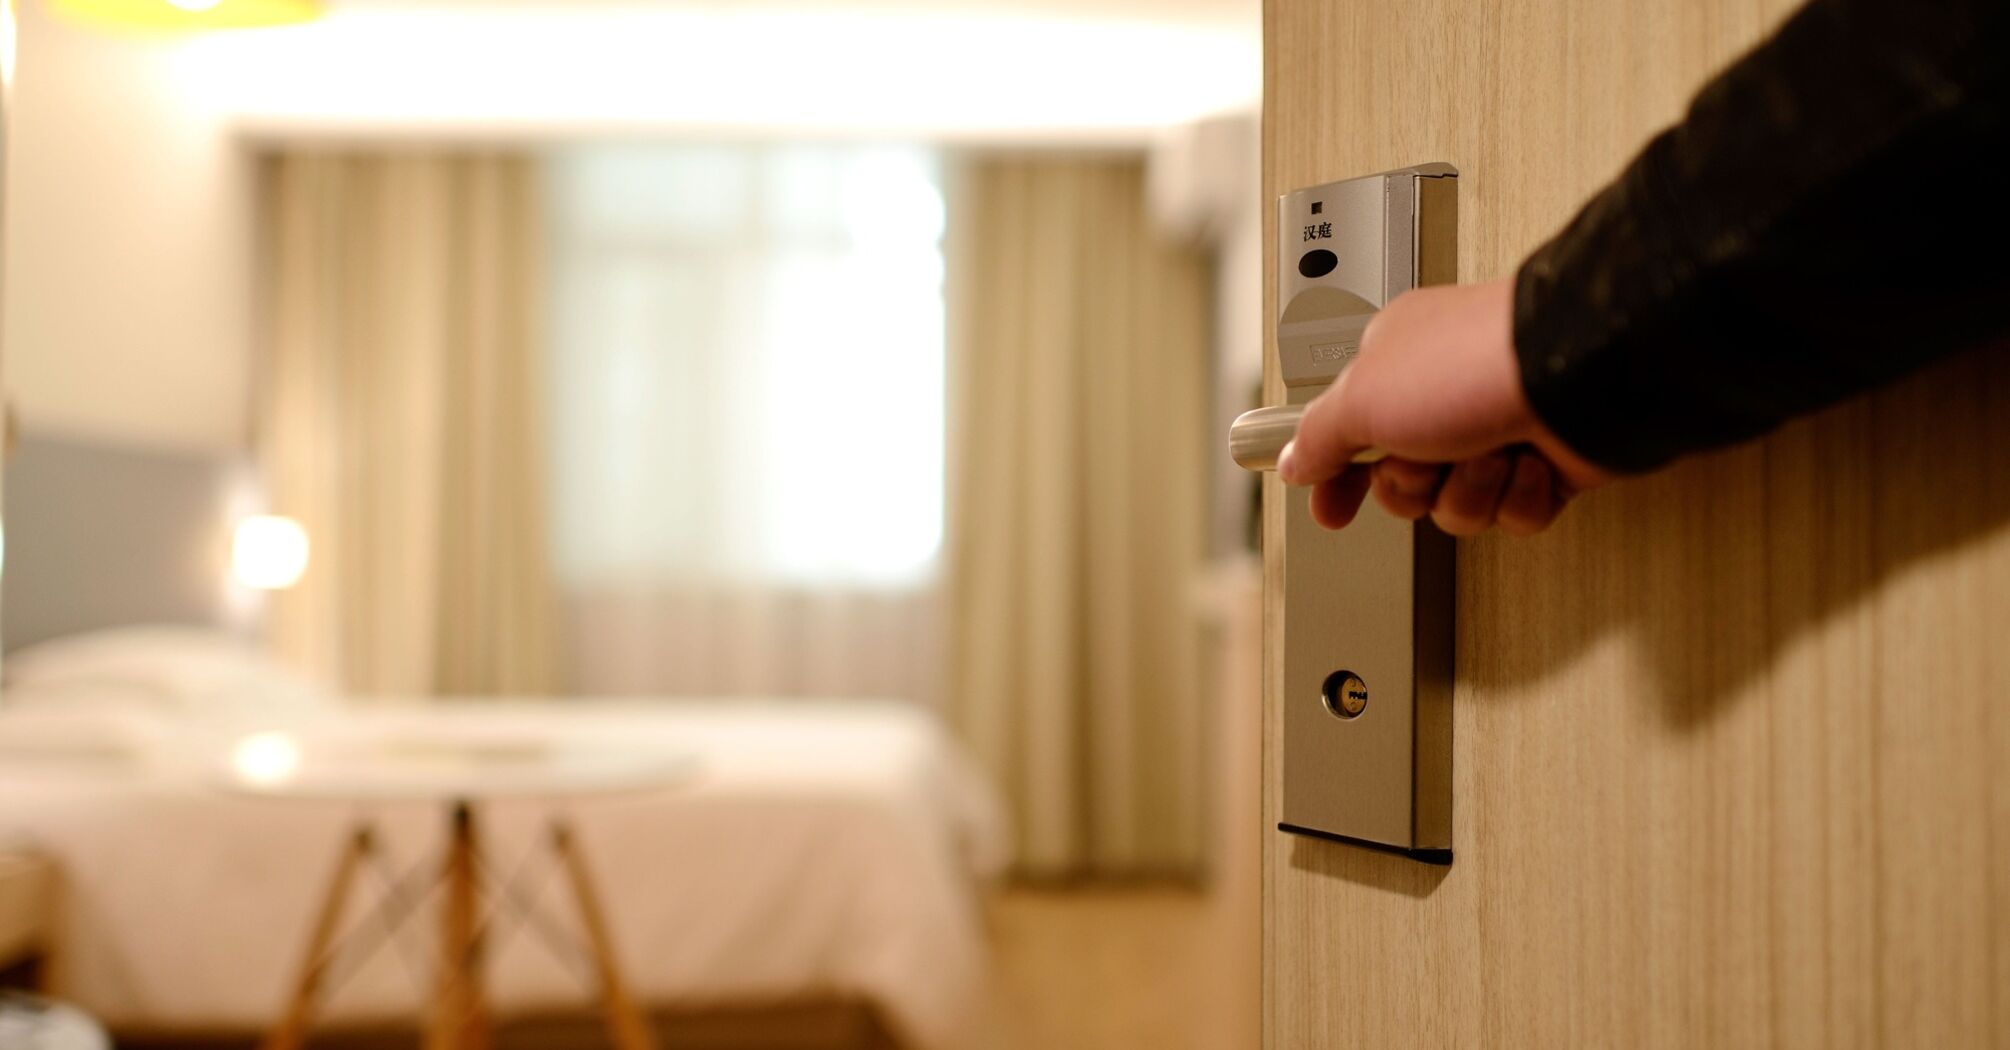 Items to avoid using in a hotel room